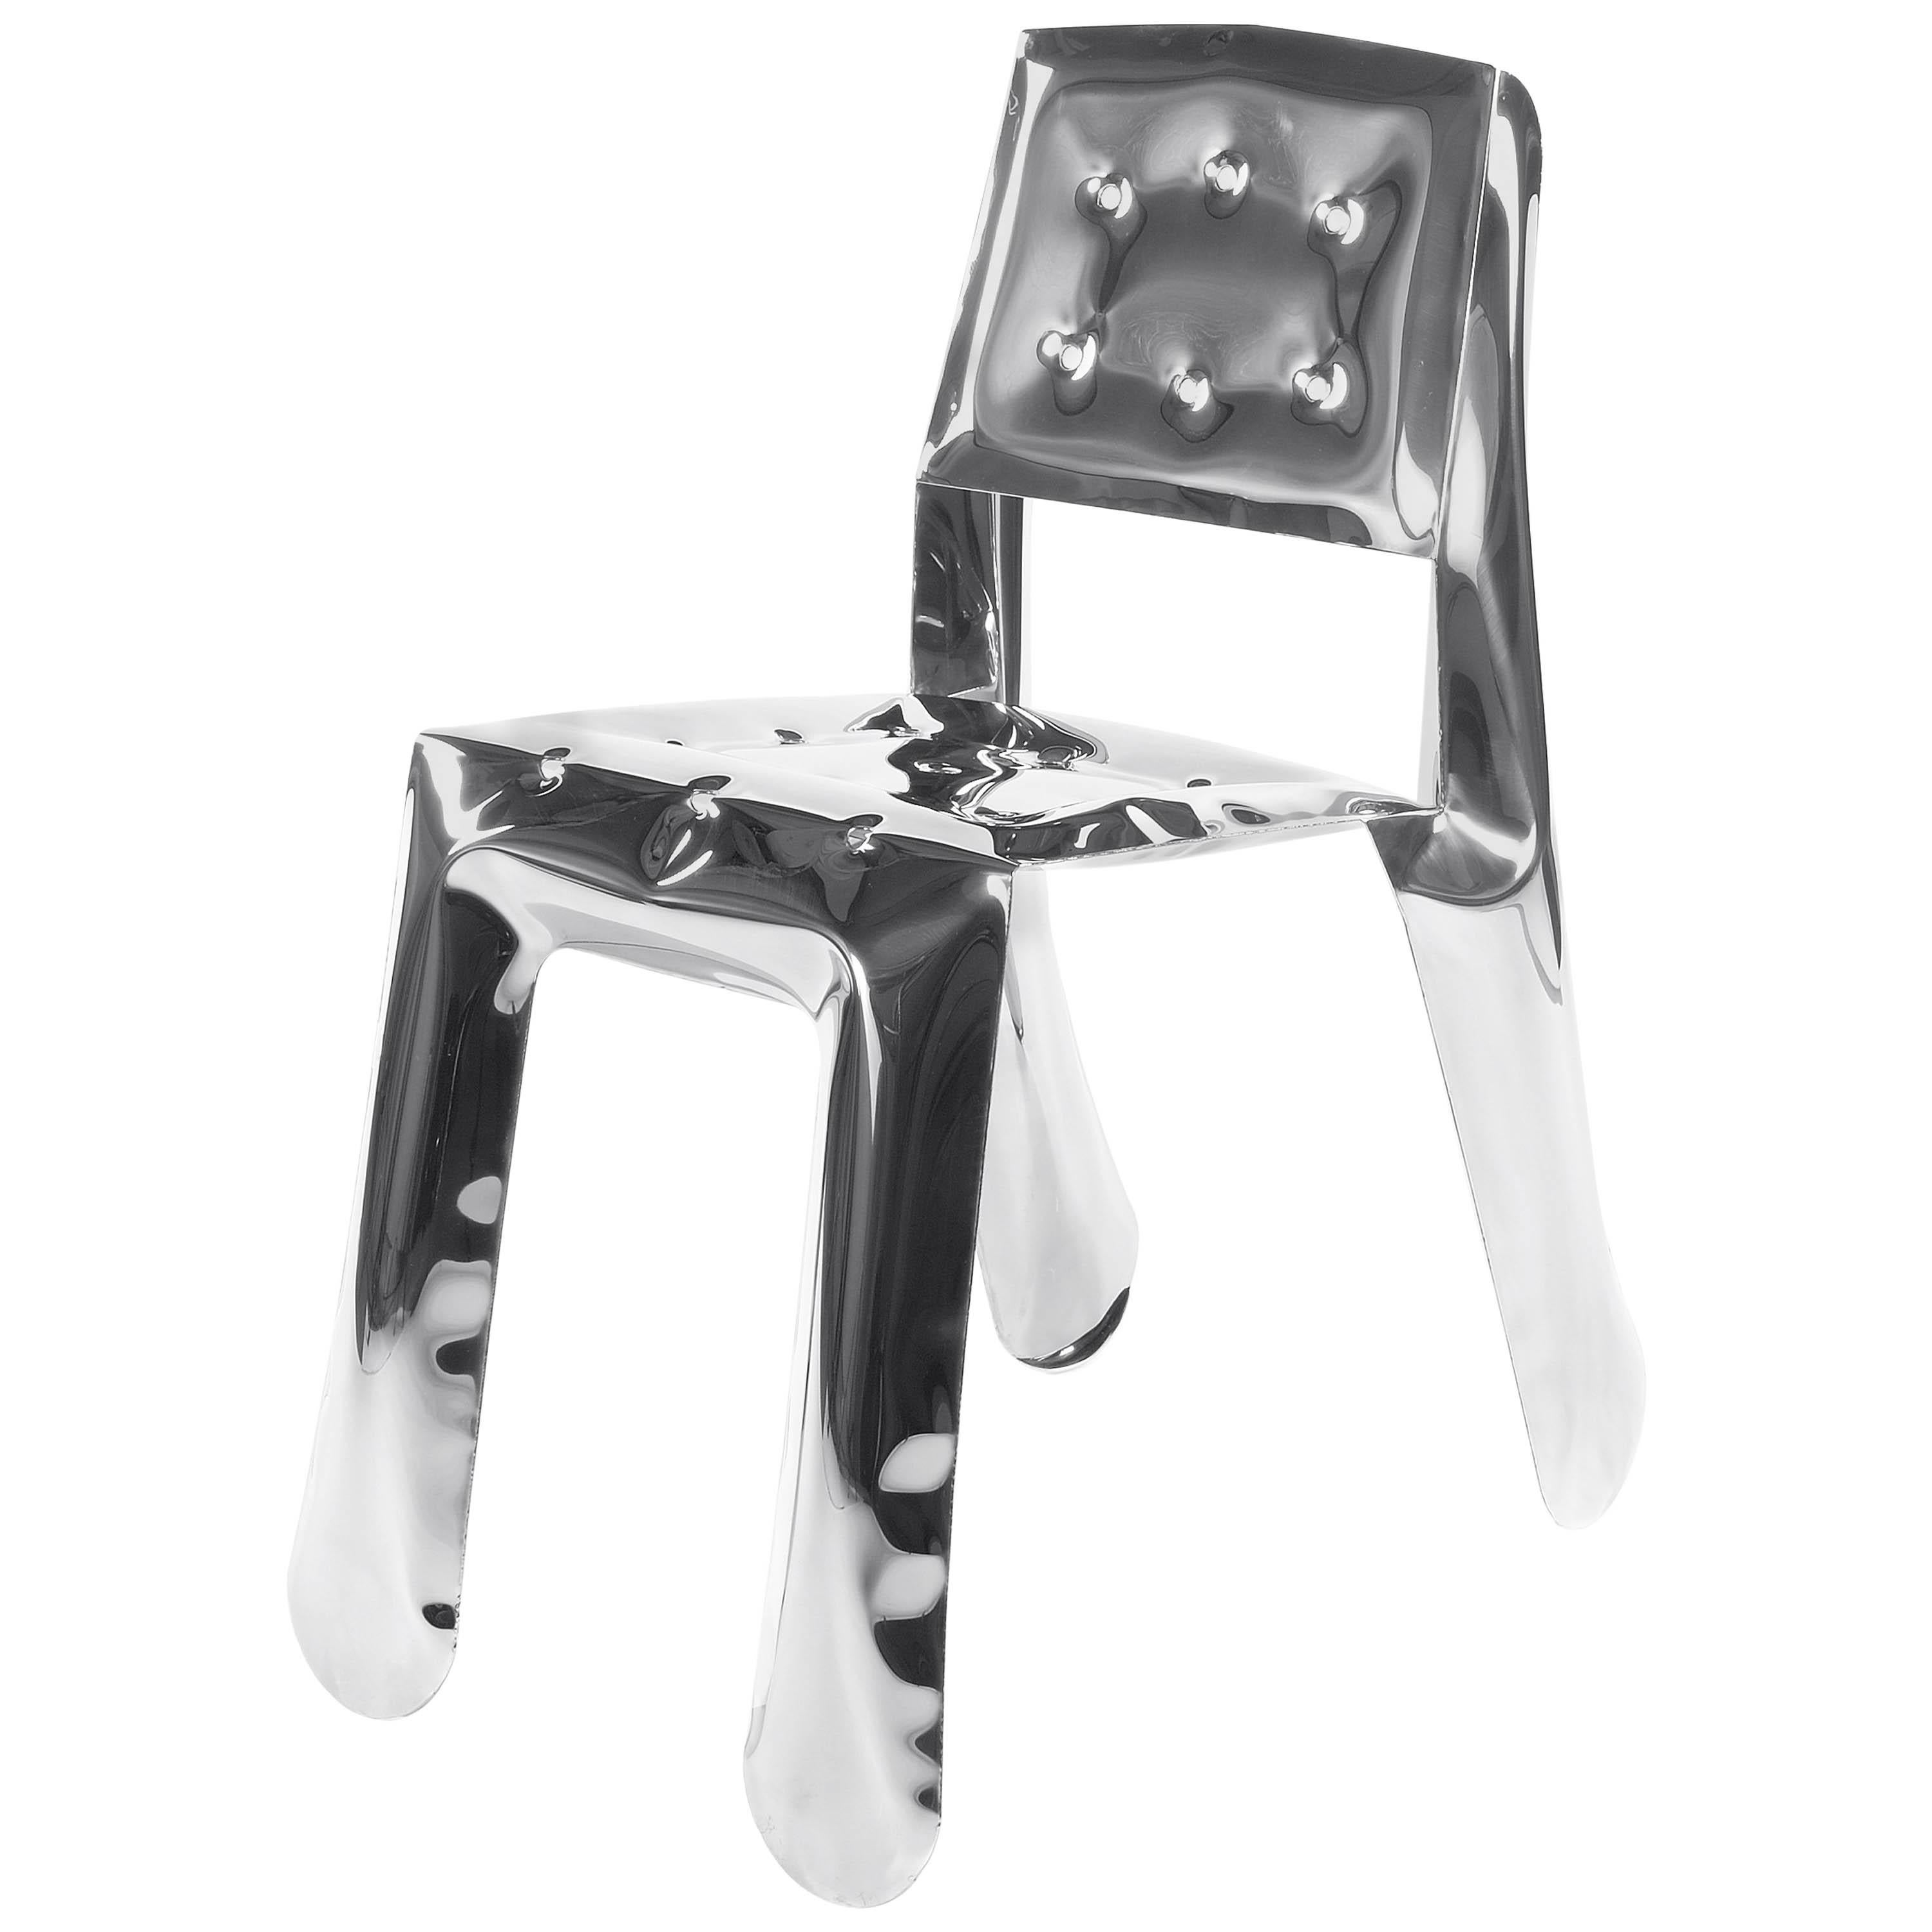 Limited Edition Chippensteel 0.5 Chair in Polished Stainless Steel by Zieta